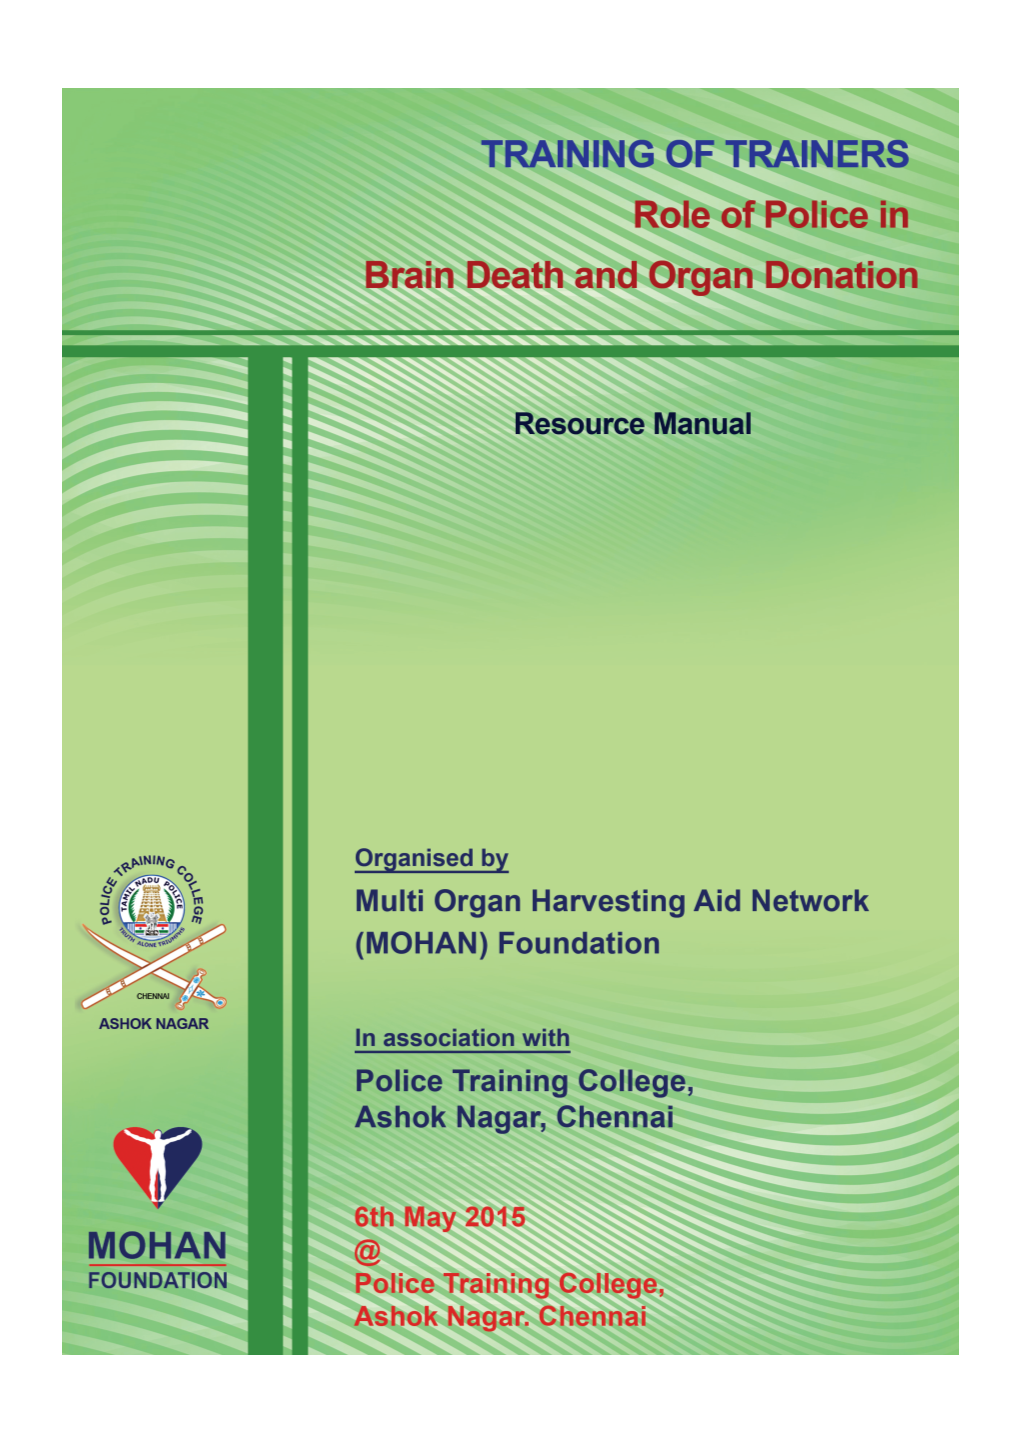 Role of Police in Brain Death and Organ Donation